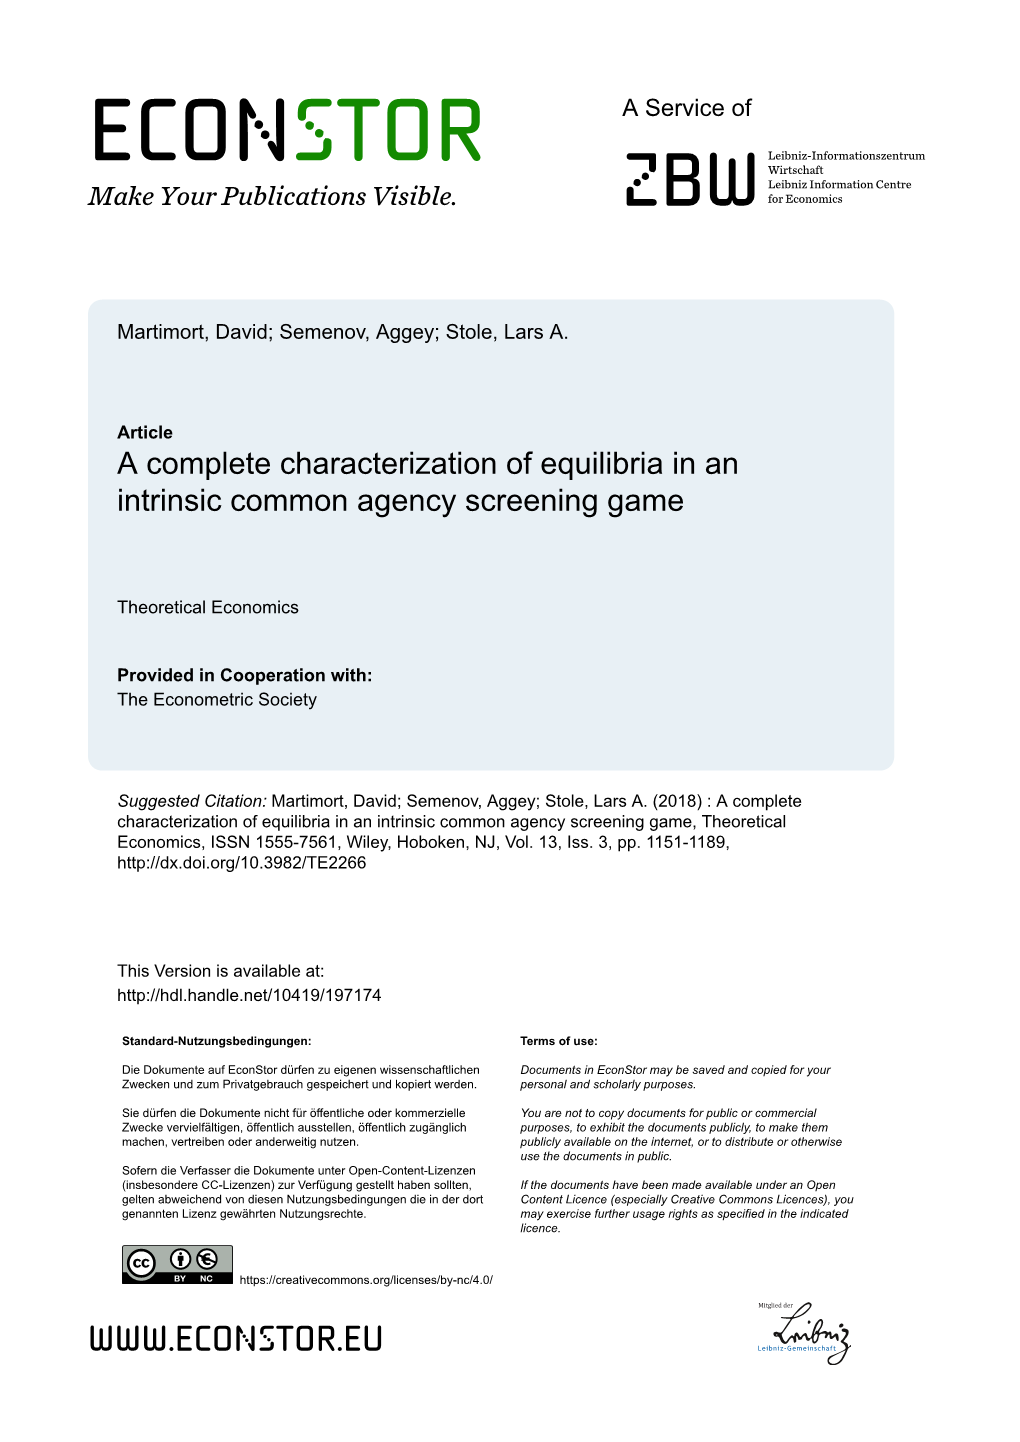 A Complete Characterization of Equilibria in an Intrinsic Common Agency Screening Game